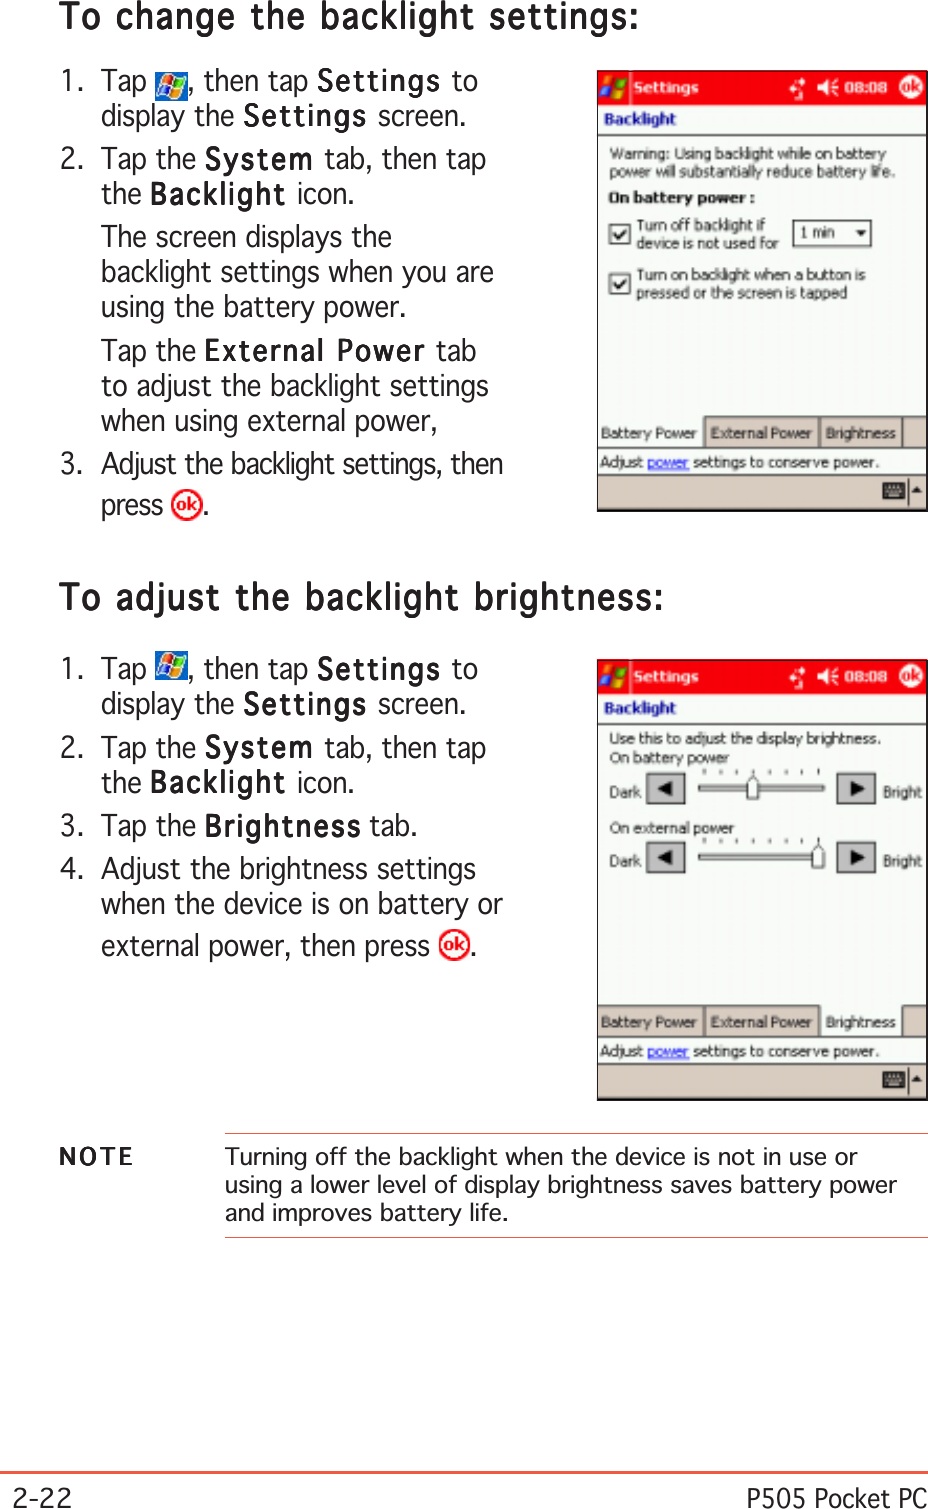 2-22P505 Pocket PCTo change the backlight settings:To change the backlight settings:To change the backlight settings:To change the backlight settings:To change the backlight settings:1. Tap  , then tap SettingsSettingsSettingsSettingsSettings todisplay the SettingsSettingsSettingsSettingsSettings screen.2. Tap the SystemSystemSystemSystemSystem tab, then tapthe BacklightBacklightBacklightBacklightBacklight icon.The screen displays thebacklight settings when you areusing the battery power.Tap the External Power External Power External Power External Power External Power tabto adjust the backlight settingswhen using external power,3. Adjust the backlight settings, thenpress  .To adjust the backlight brightness:To adjust the backlight brightness:To adjust the backlight brightness:To adjust the backlight brightness:To adjust the backlight brightness:1. Tap  , then tap SettingsSettingsSettingsSettingsSettings todisplay the SettingsSettingsSettingsSettingsSettings screen.2. Tap the SystemSystemSystemSystemSystem tab, then tapthe BacklightBacklightBacklightBacklightBacklight icon.3. Tap the BrightnessBrightnessBrightnessBrightnessBrightness tab.4. Adjust the brightness settingswhen the device is on battery orexternal power, then press  .NOTENOTENOTENOTEN O T E Turning off the backlight when the device is not in use orusing a lower level of display brightness saves battery powerand improves battery life.